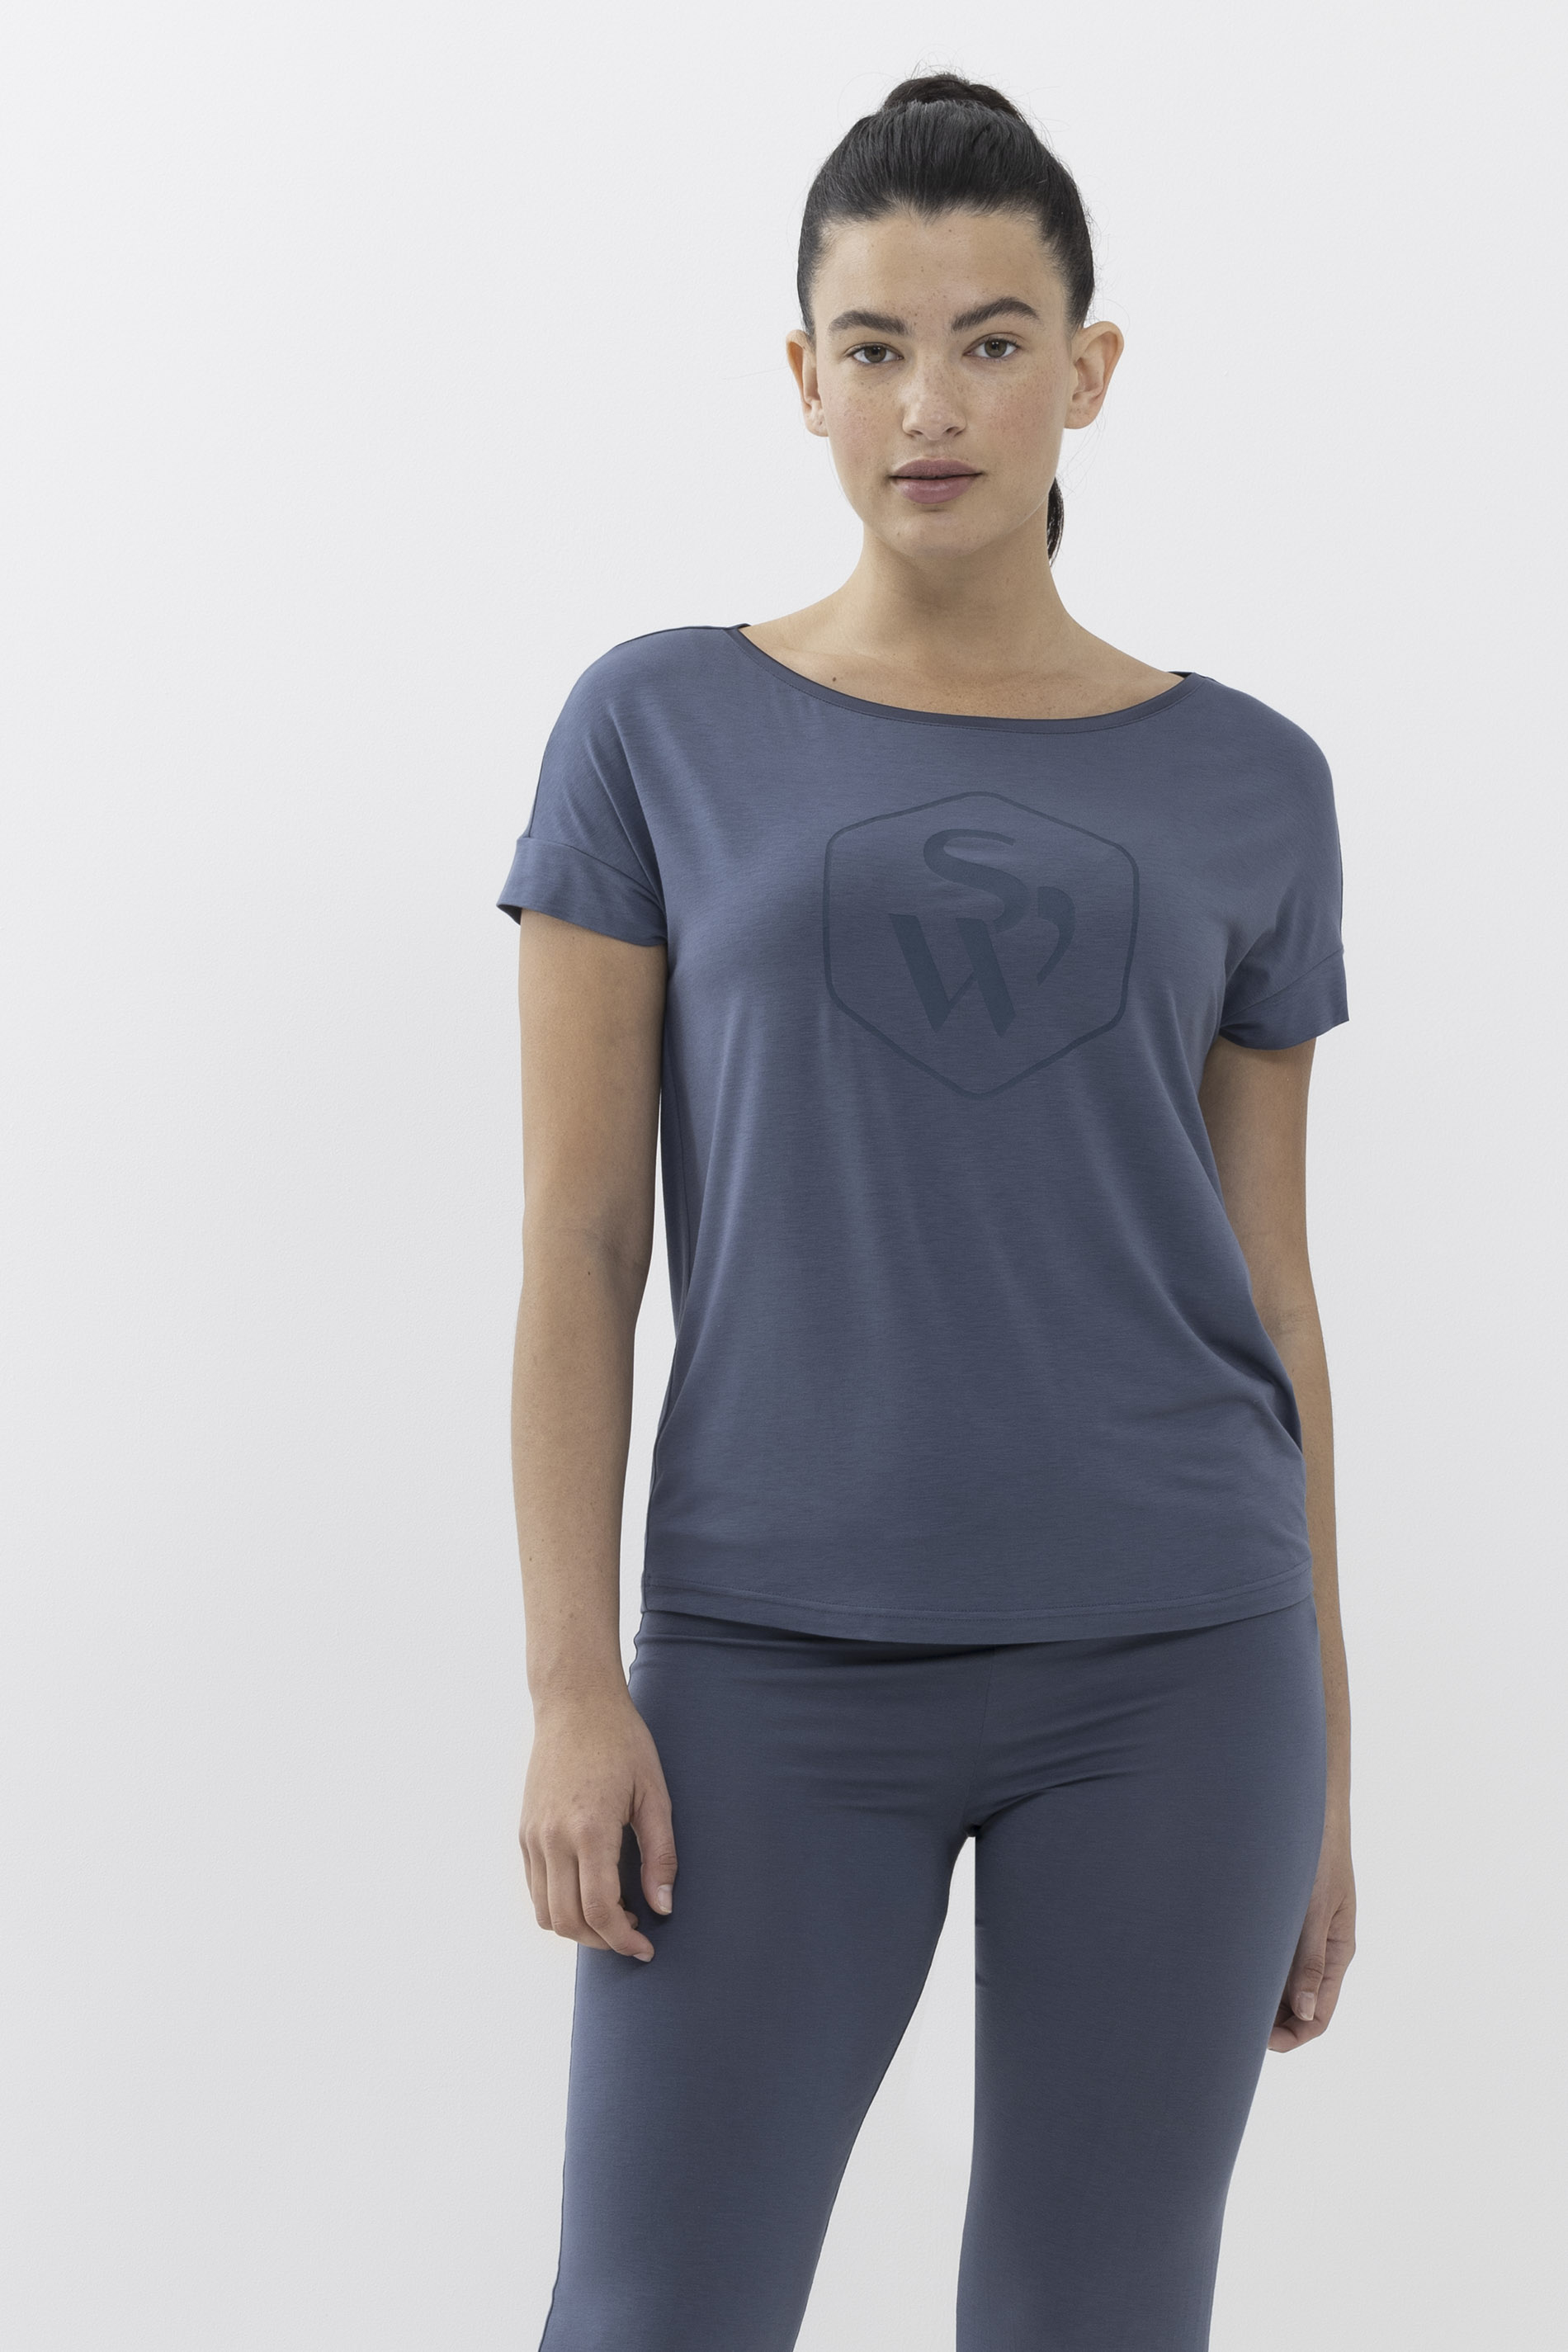 T-shirt Carbon Serie Breathable Front View | mey®